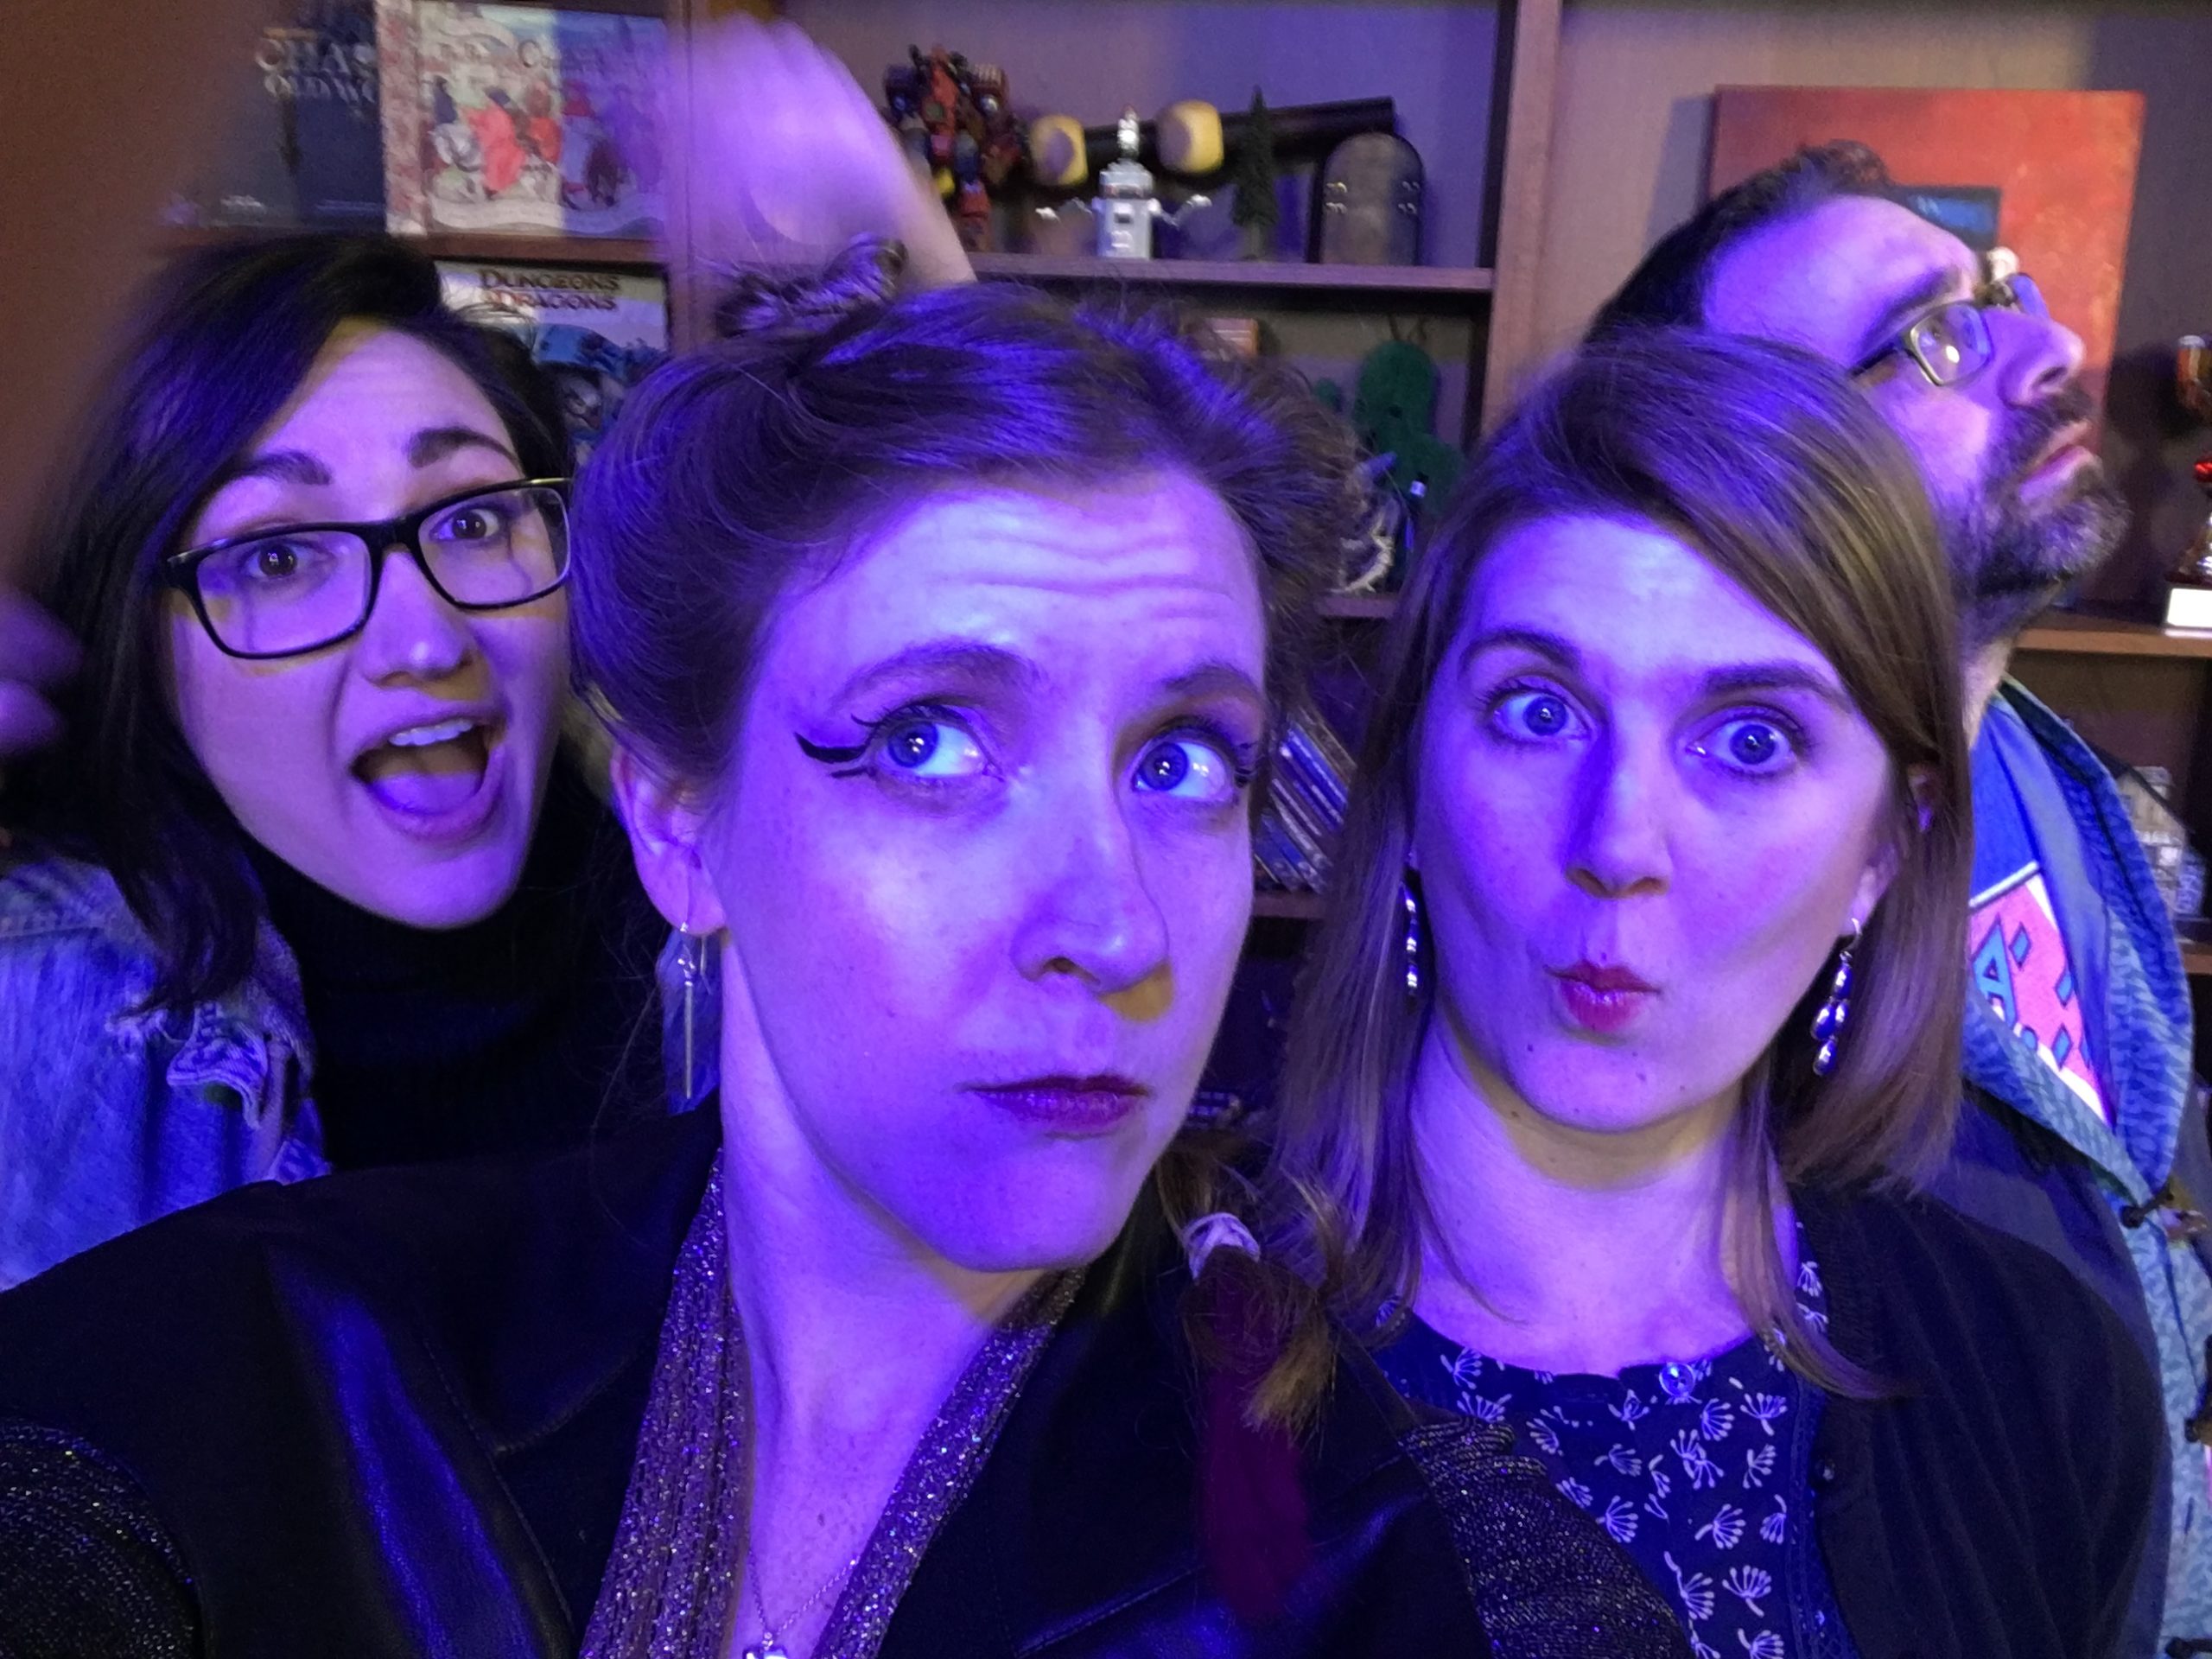 Claudia, Cheryl, Jeannine, and Dan from the cast of "Shadowrun: Corporate SINS" taking a prep-show selfie on set. The mood is mysterious, with deep blue lighting, and Cheryl's expression is pensive.